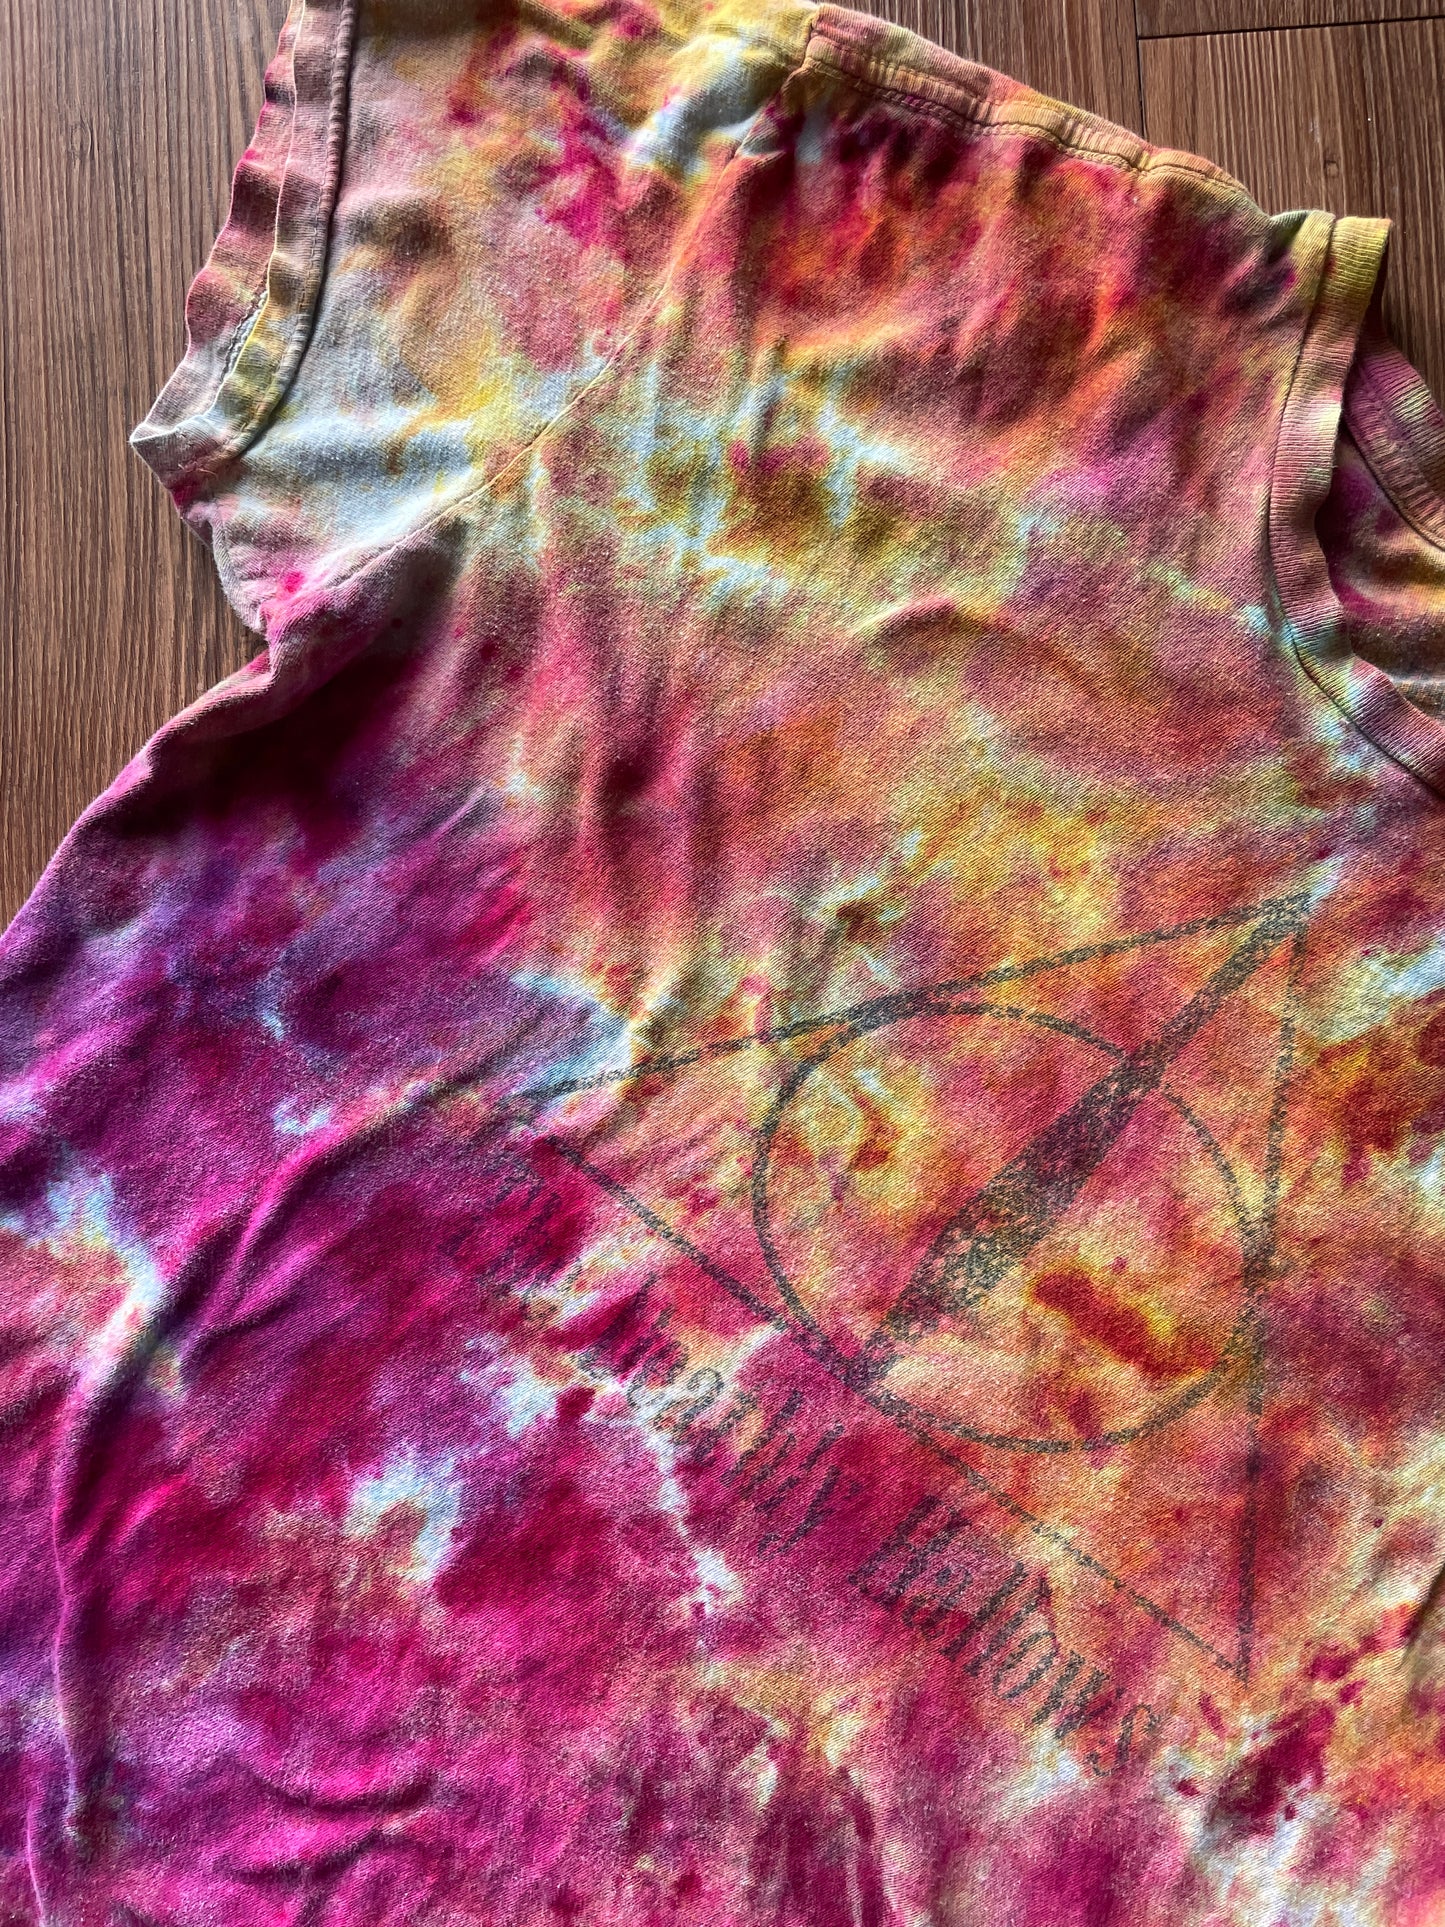 Large Women’s Harry Potter and The Deathly Hallows Galaxy Handmade Tie Dye T-Shirt | One-Of-a-Kind Pink and Orange Snow Dyed Short Sleeve